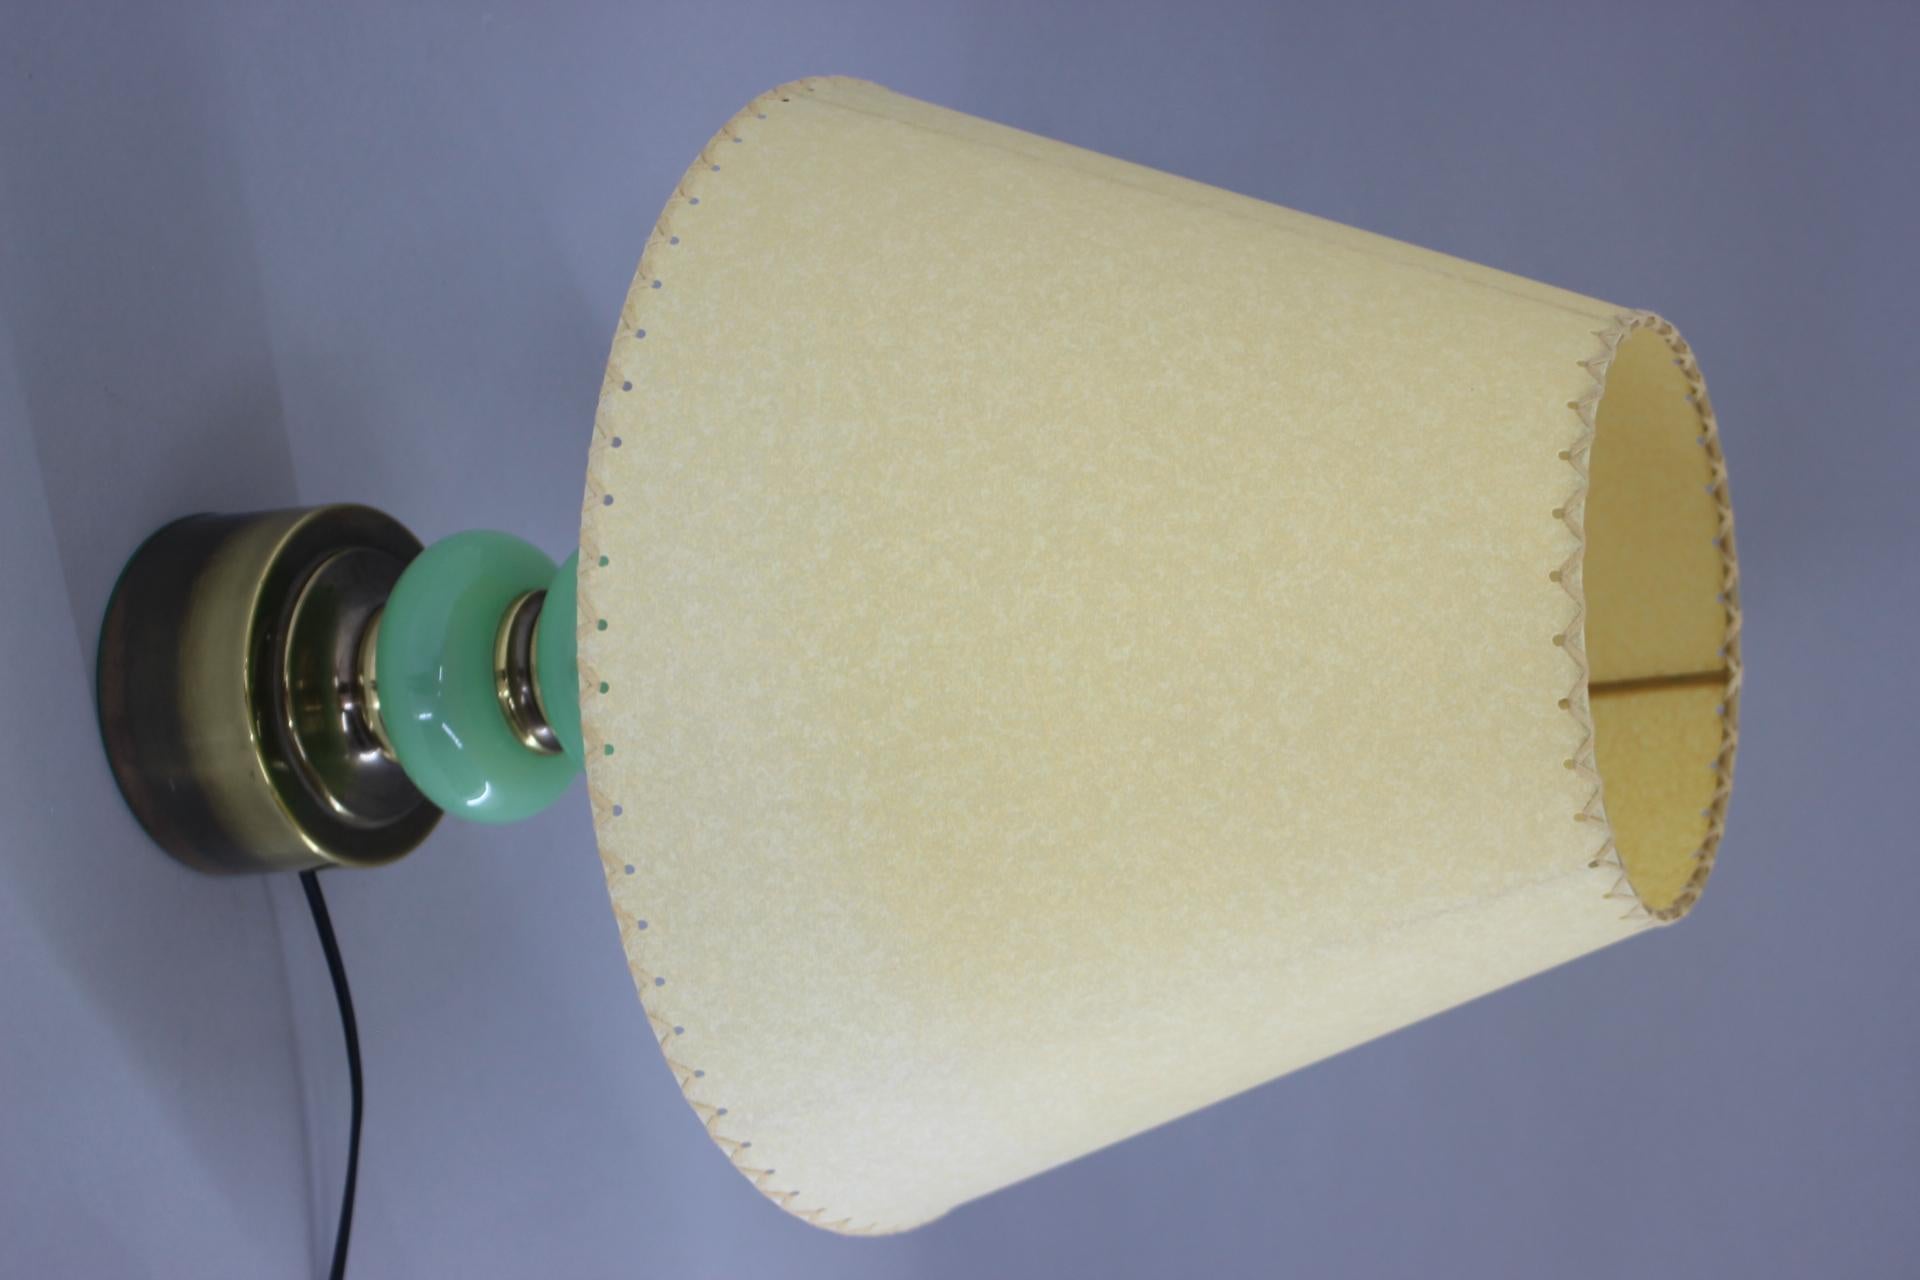 - New handmade paper lamp shade. 
- Glass parts. 
- Newly rewired.